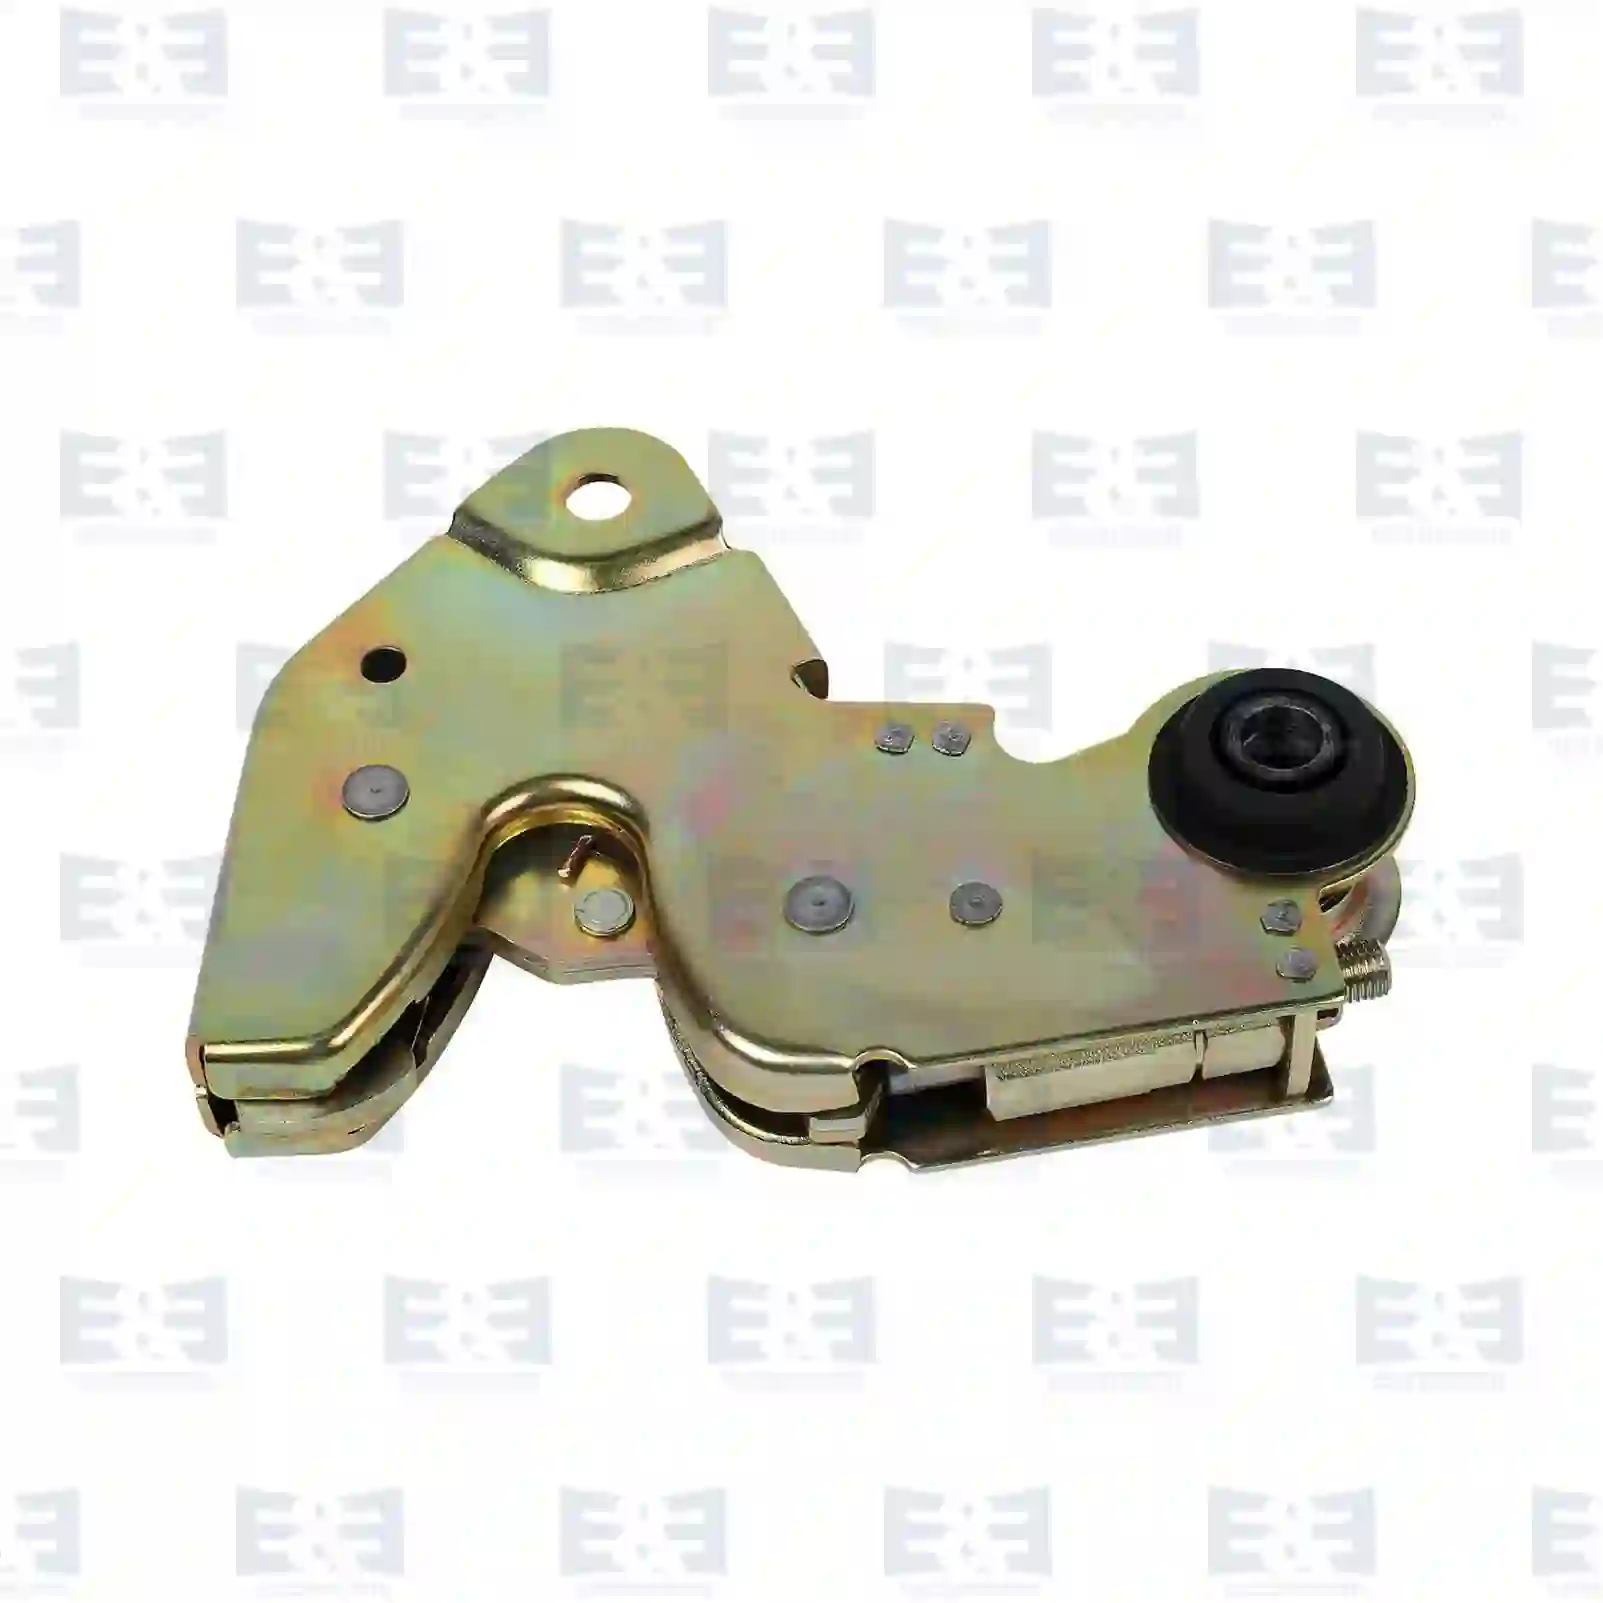  Cabin lock, without switch || E&E Truck Spare Parts | Truck Spare Parts, Auotomotive Spare Parts